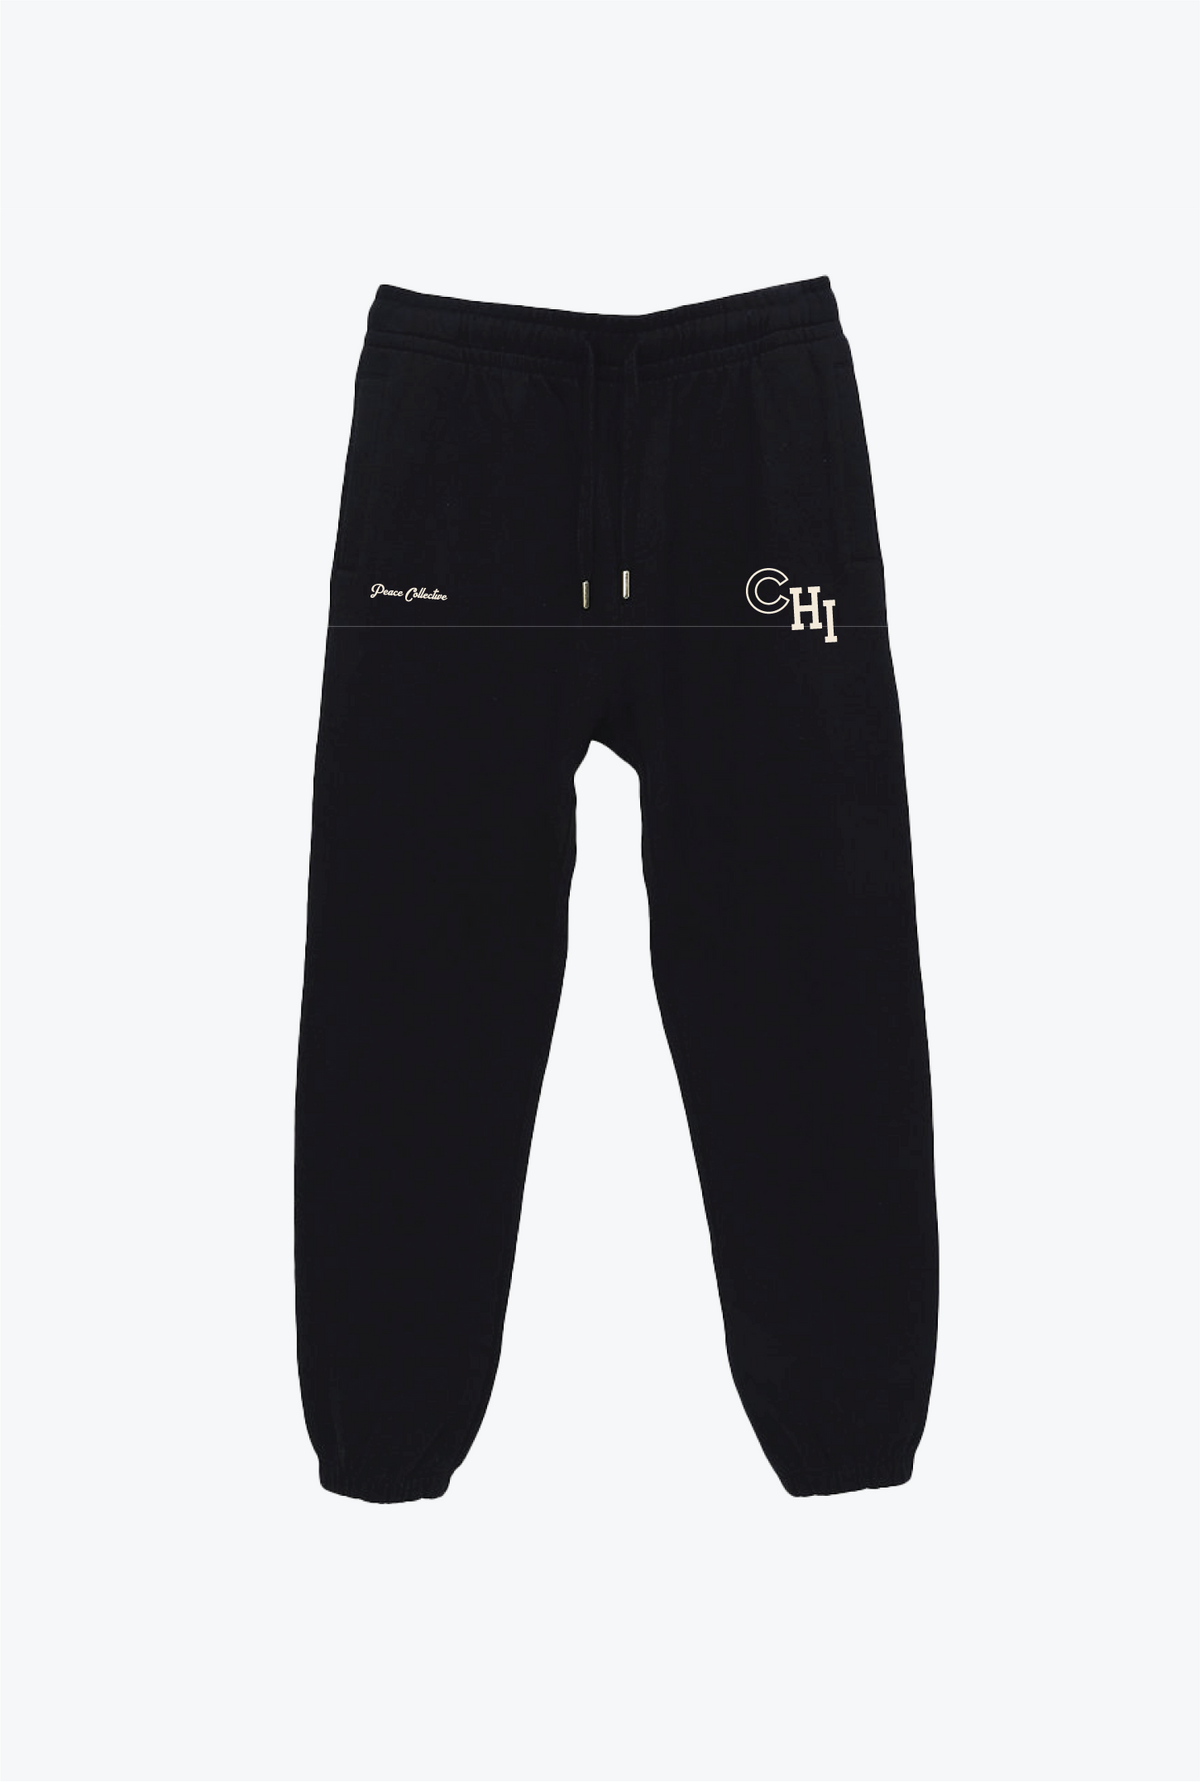 Chicago Cubs Heavyweight Jogger - Black